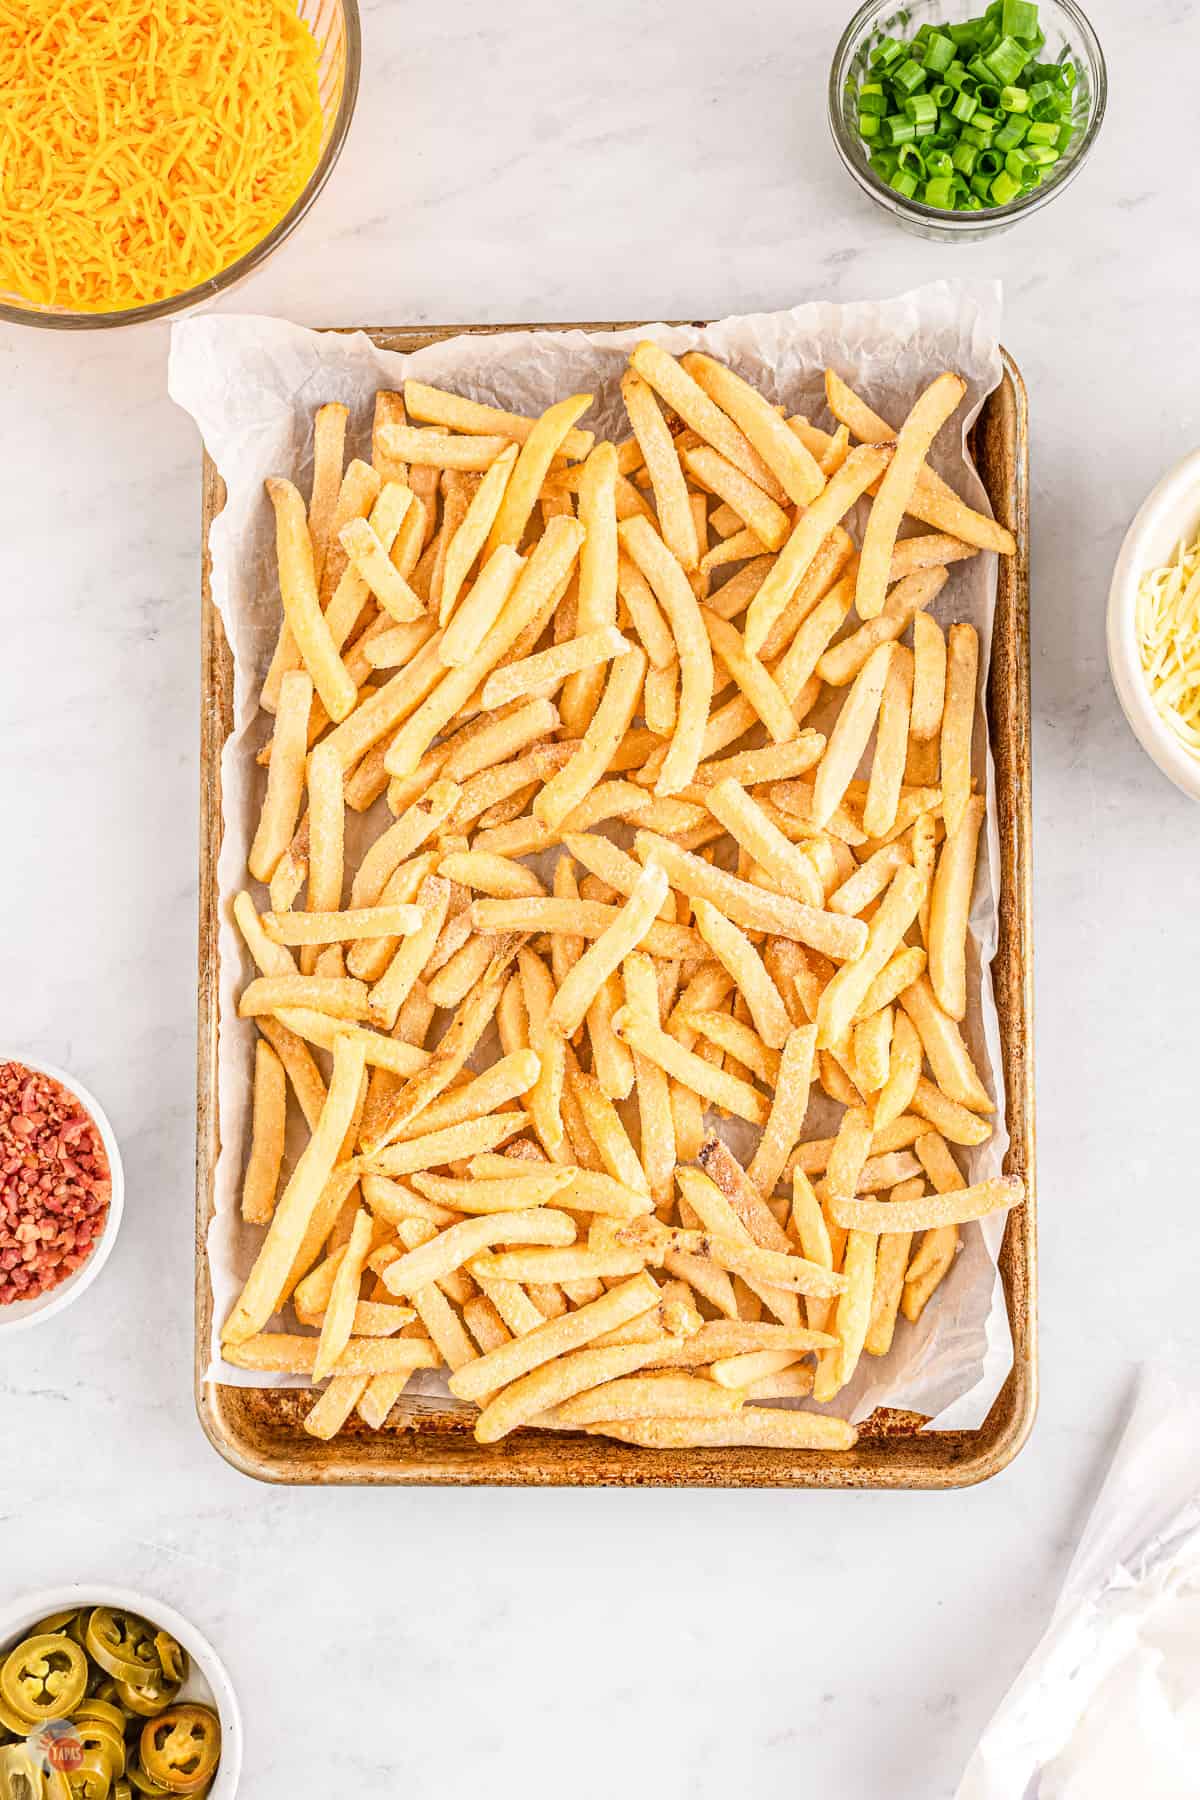 A baking tray lined with parchment paper filled with frozen french fries.